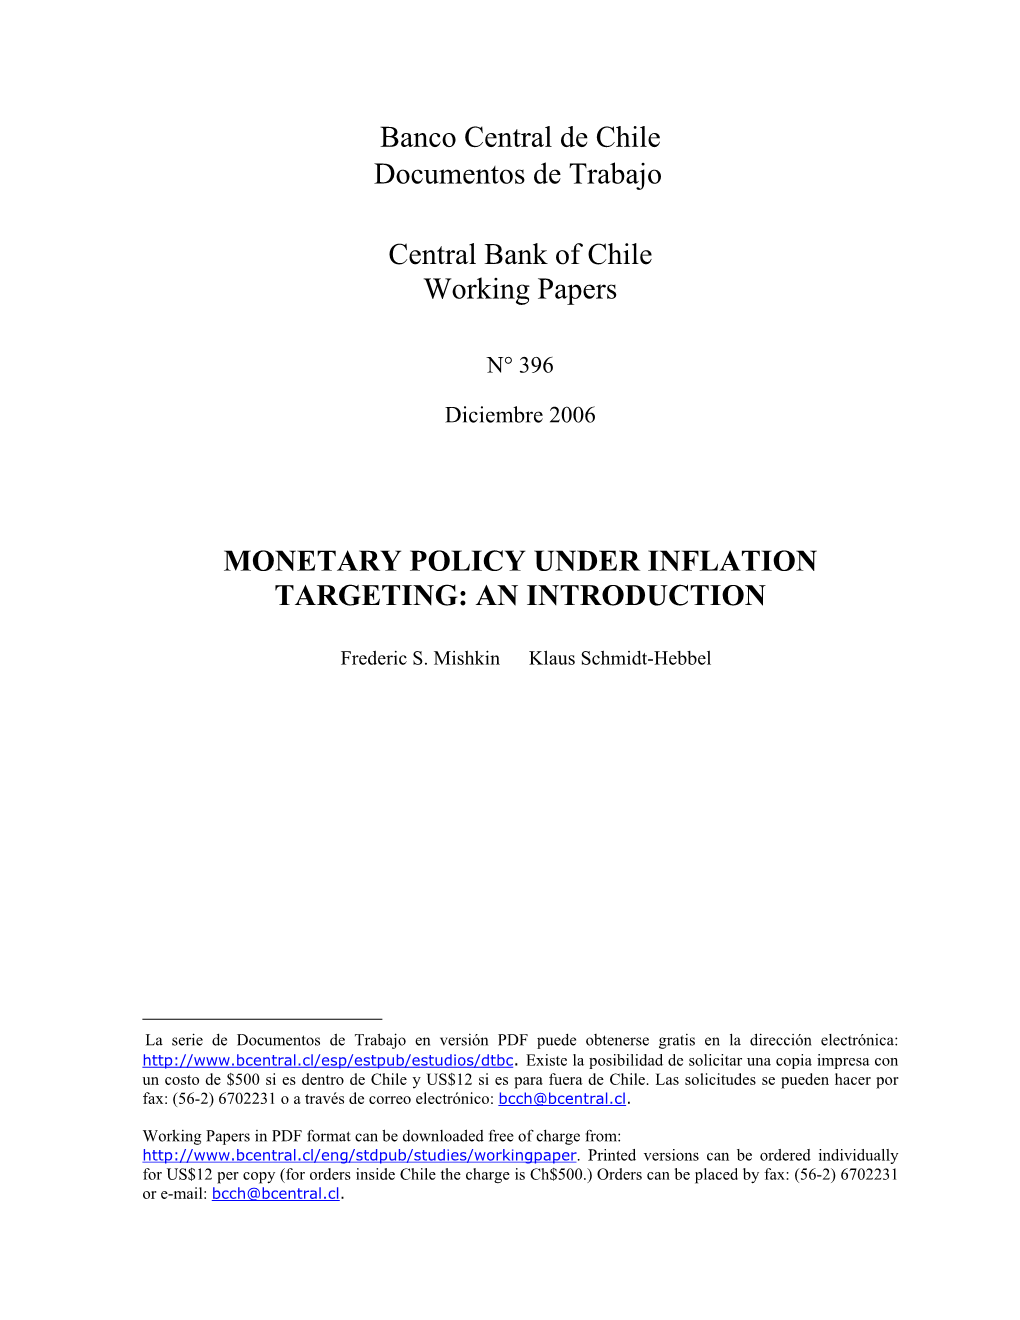 Monetary Policy Under Inflation Targeting: an Introduction